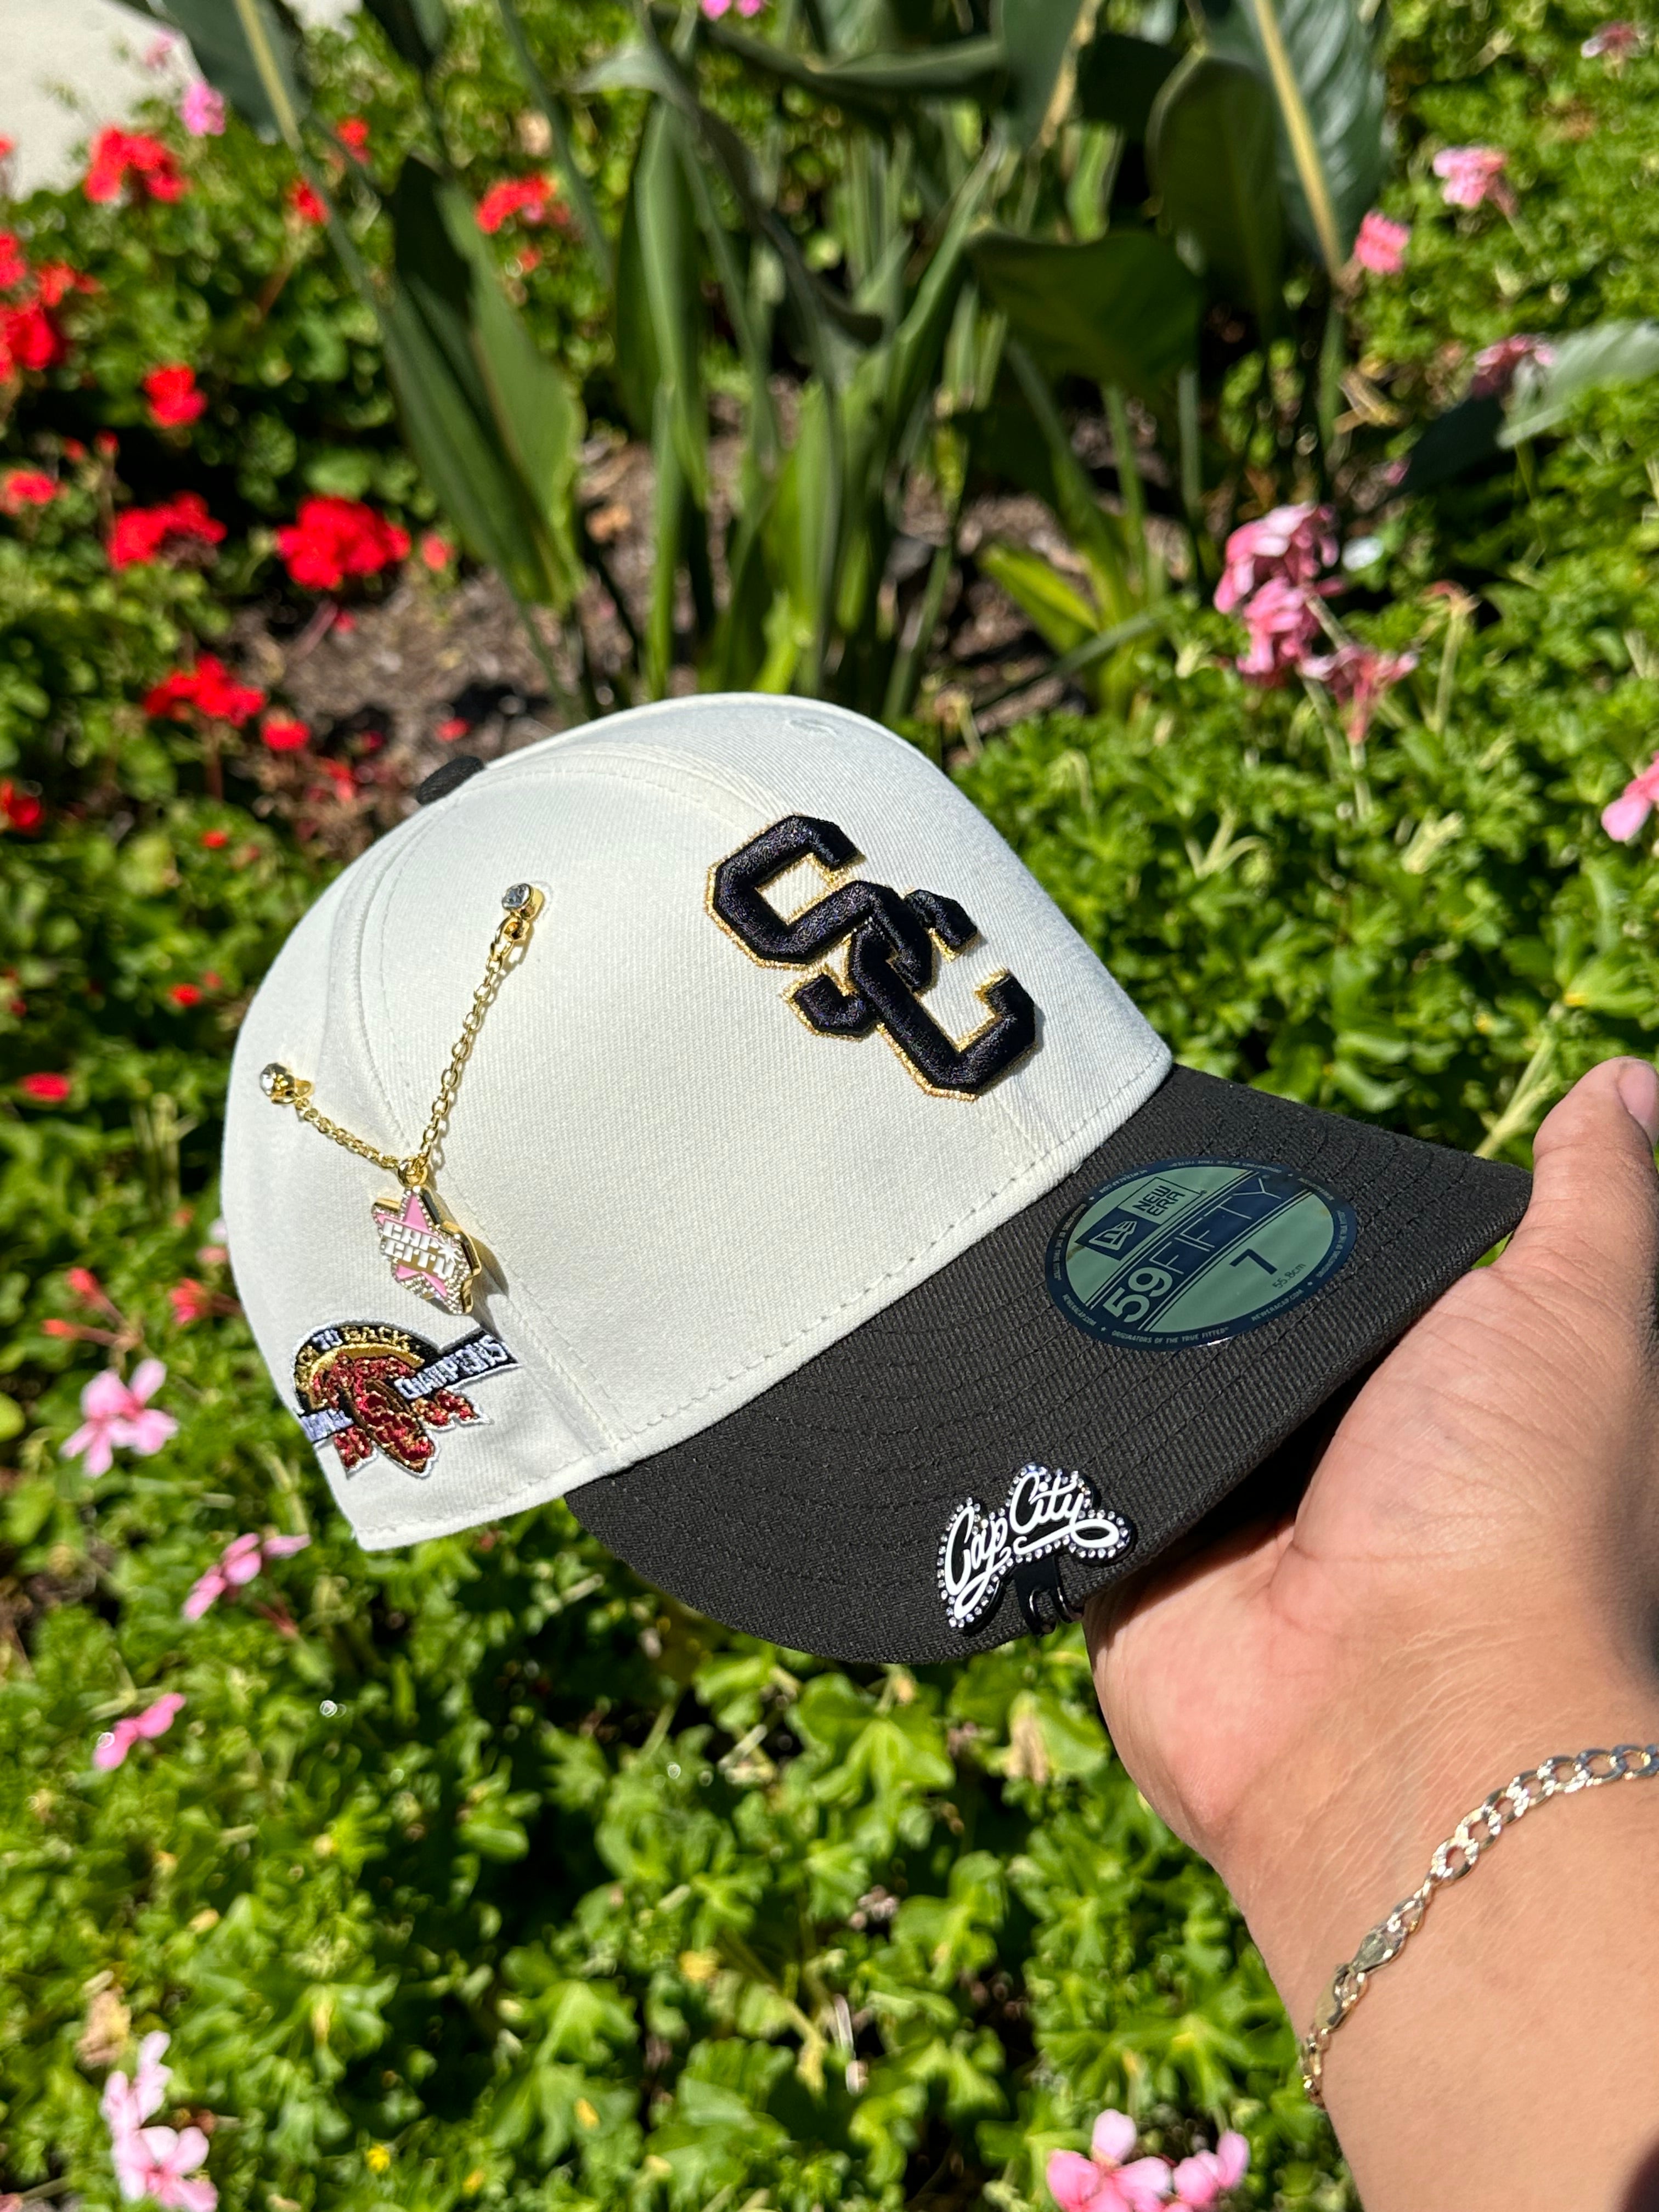 NEW ERA EXCLUSIVE 59FIFTY CHROME WHITE/BLACK "USC TROJANS" W/ BACK TO BACK CHAMPIONS SIDE PATCH